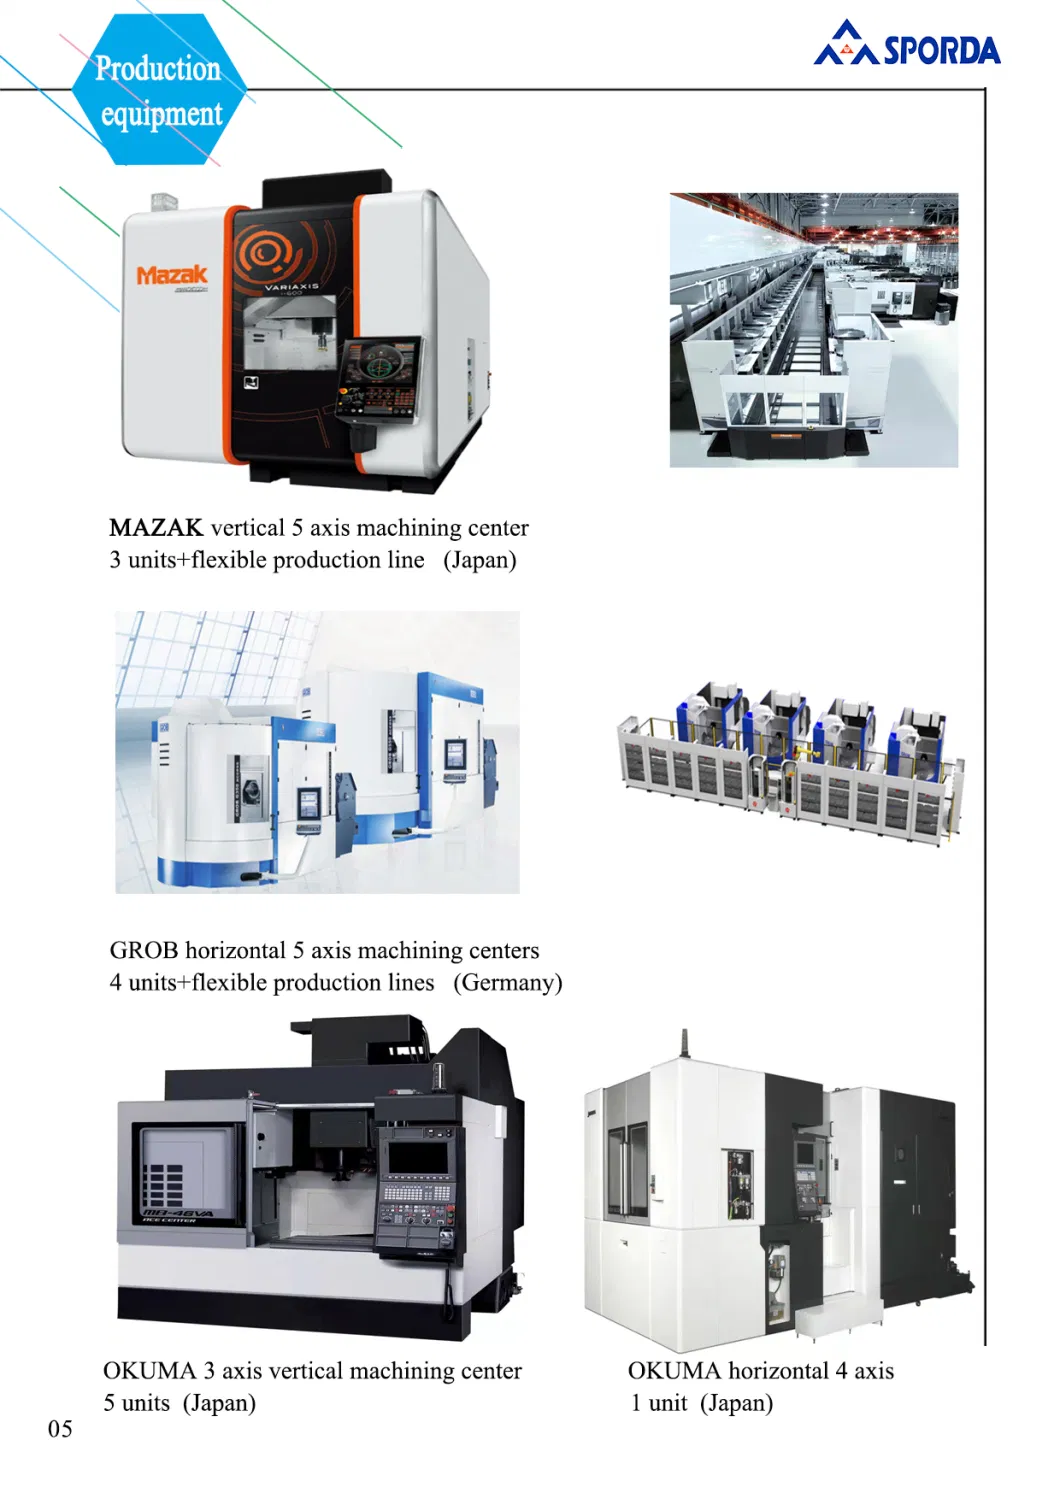 High-Quality Casting Precision Rapid CNC Prototyping Solutions